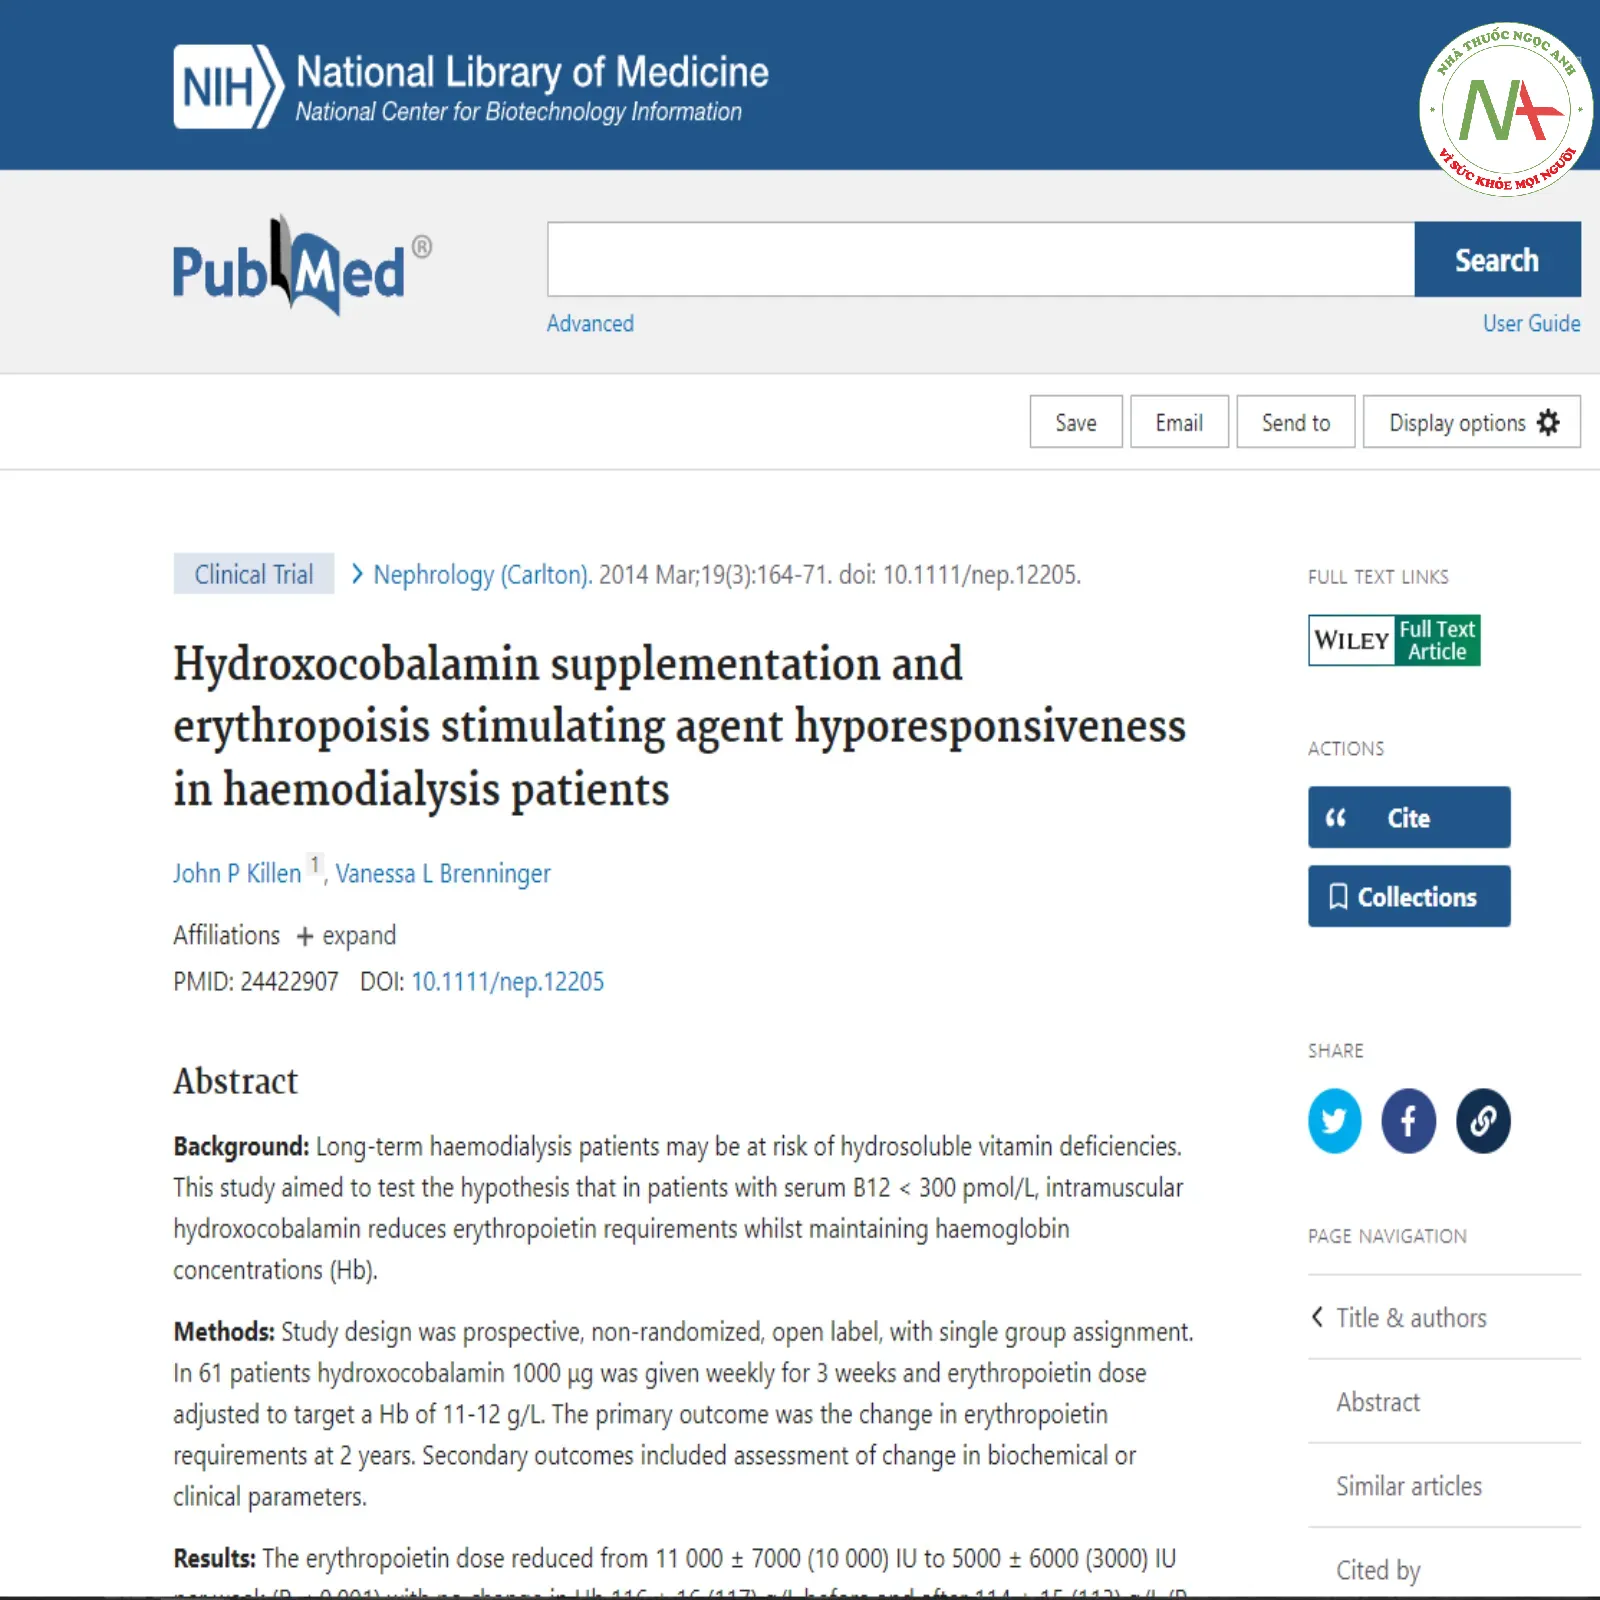 Hydroxocobalamin supplementation and erythropoisis stimulating agent hyporesponsiveness in haemodialysis patients